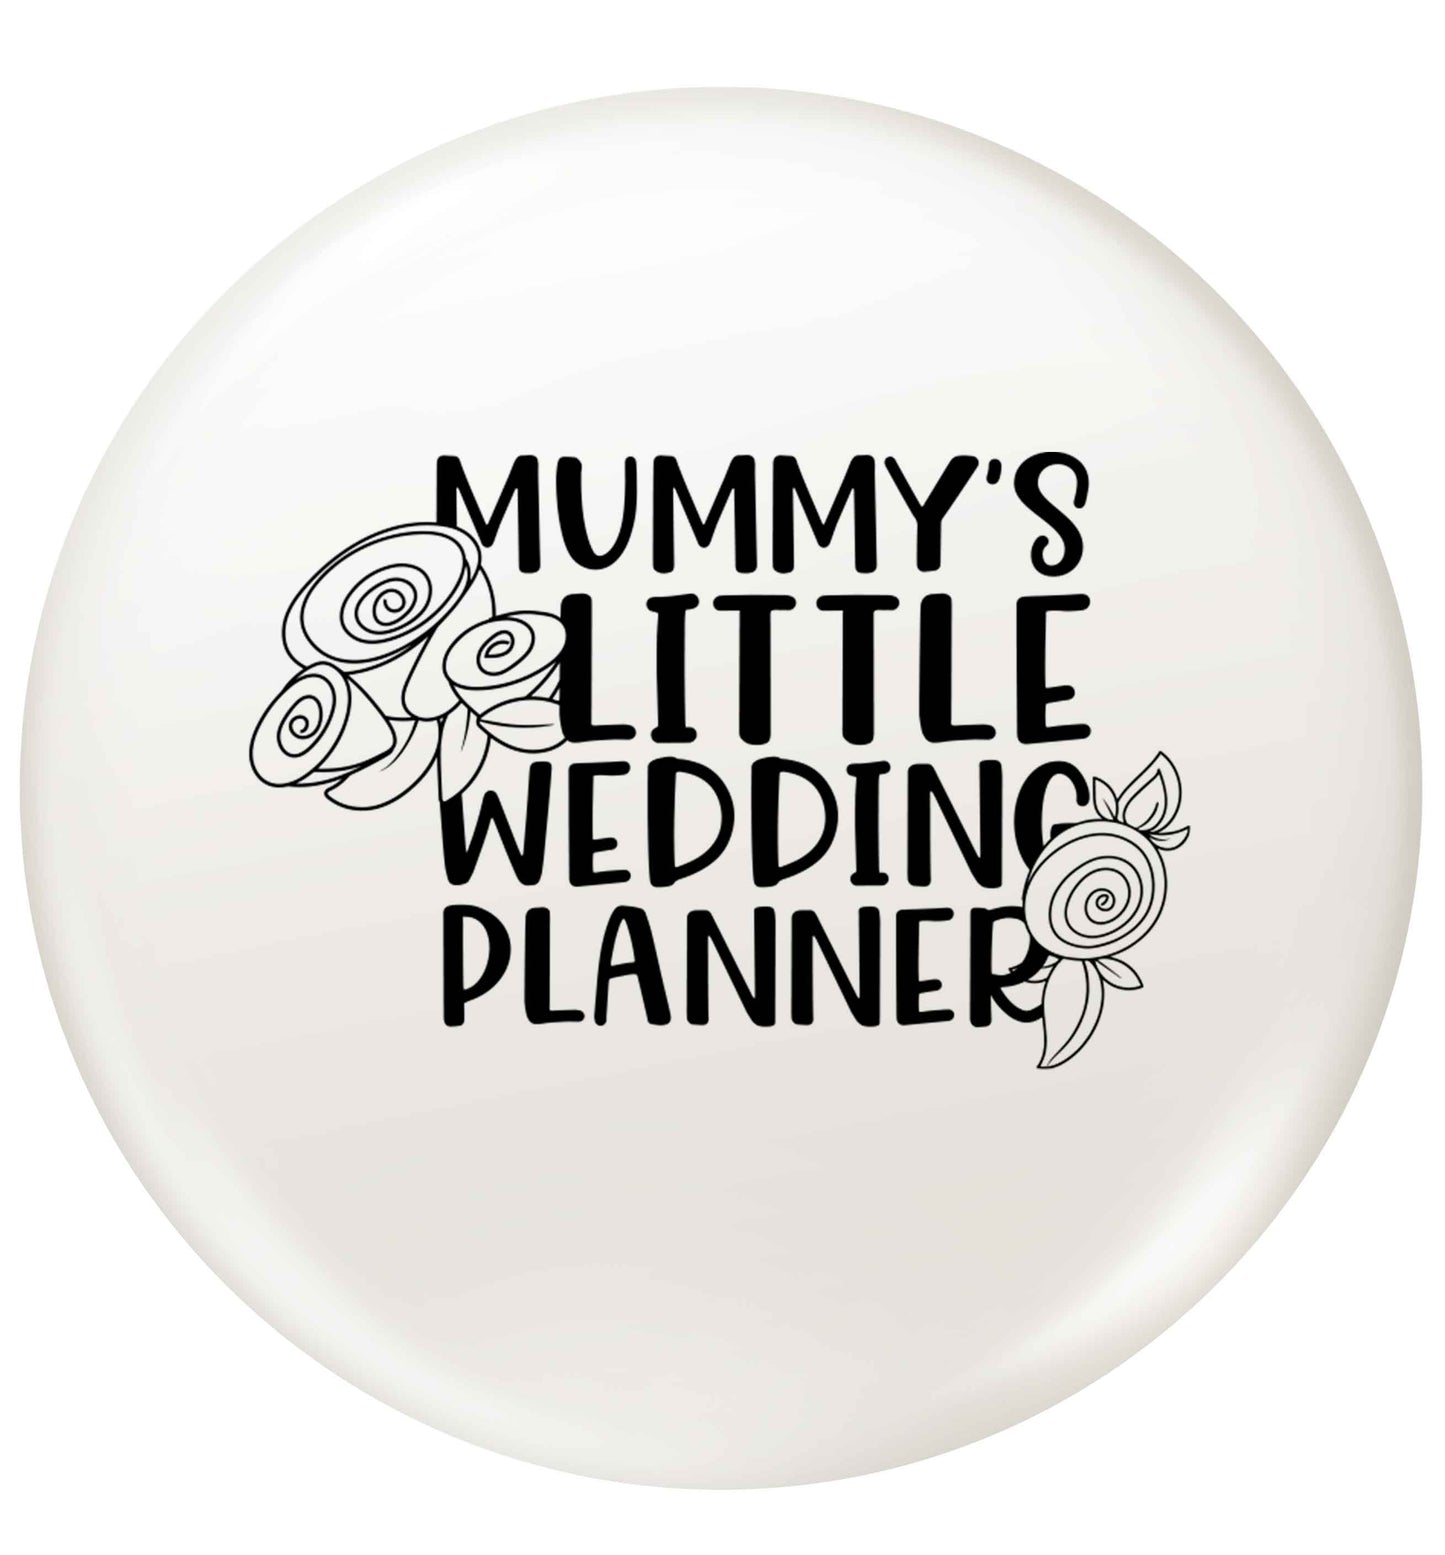 adorable wedding themed gifts for your mini wedding planner! small 25mm Pin badge